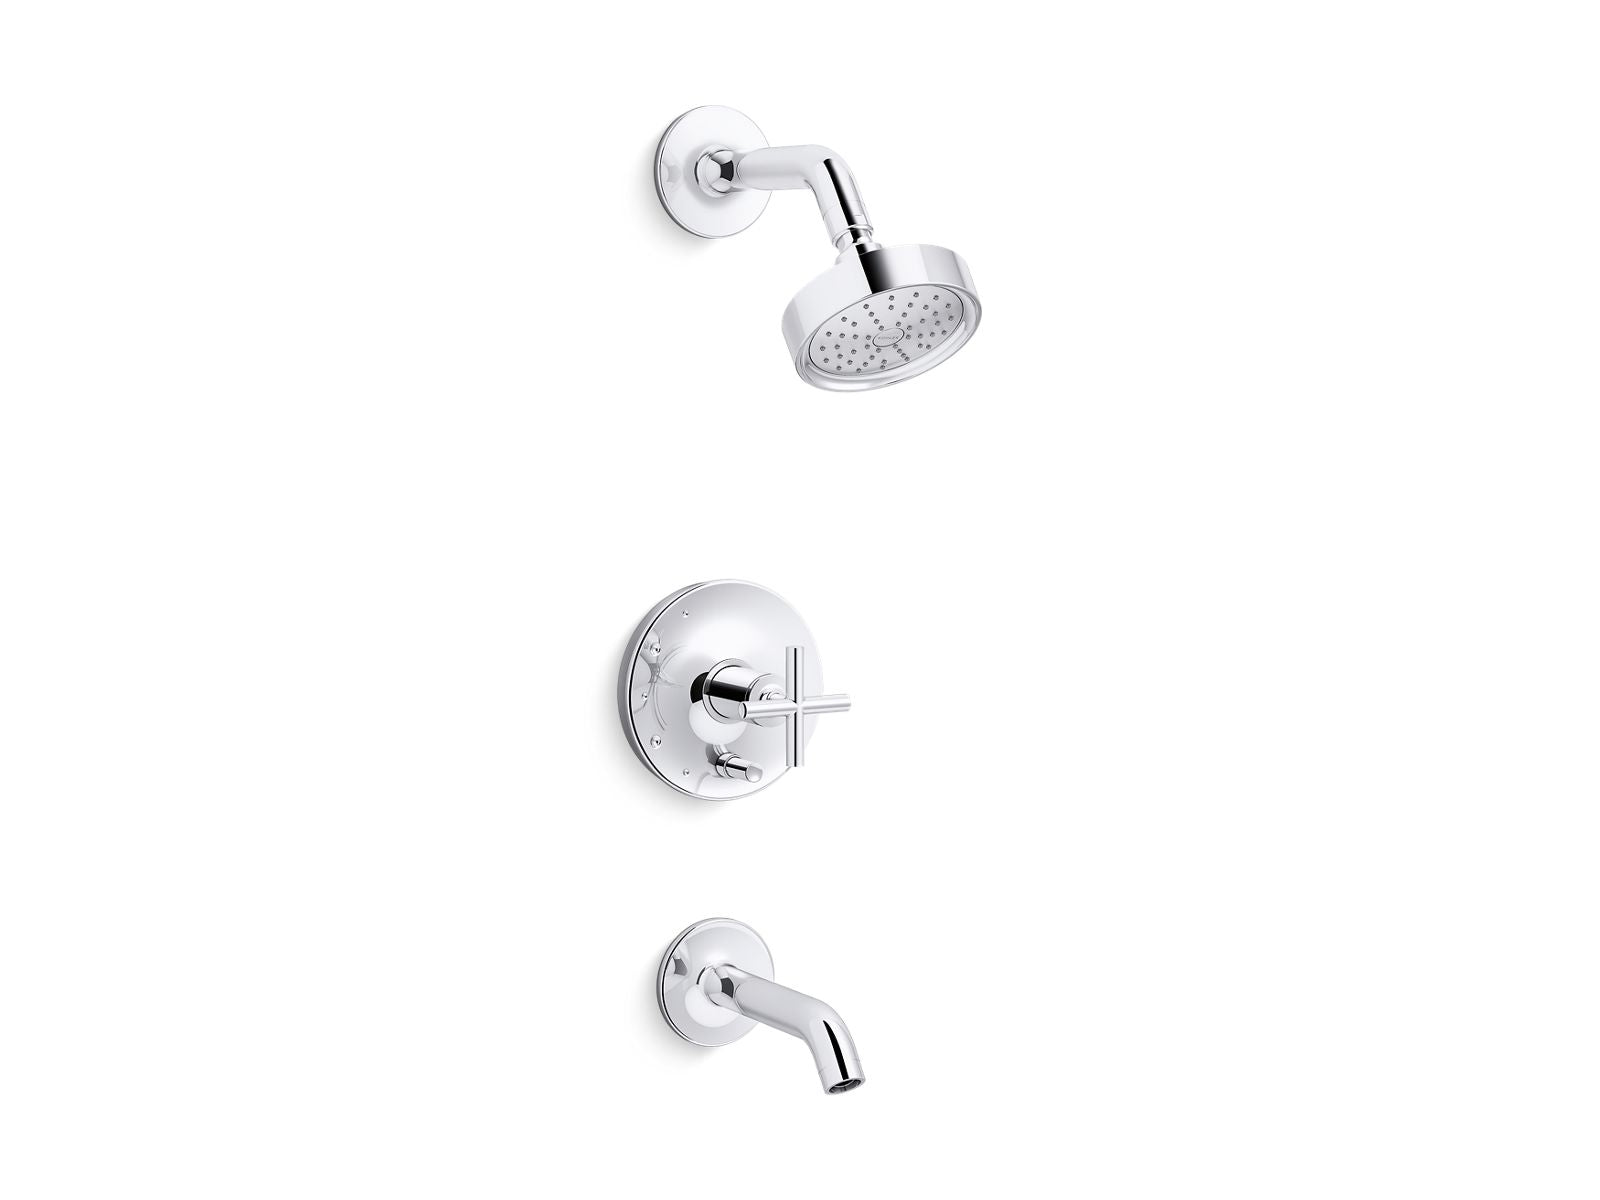 KOHLER K-T14420-3G-BL United States Purist Purist Rite-Temp Bath And Shower Trim Kit With Push-Button Diverter And Cross Handle 1.75 GPM